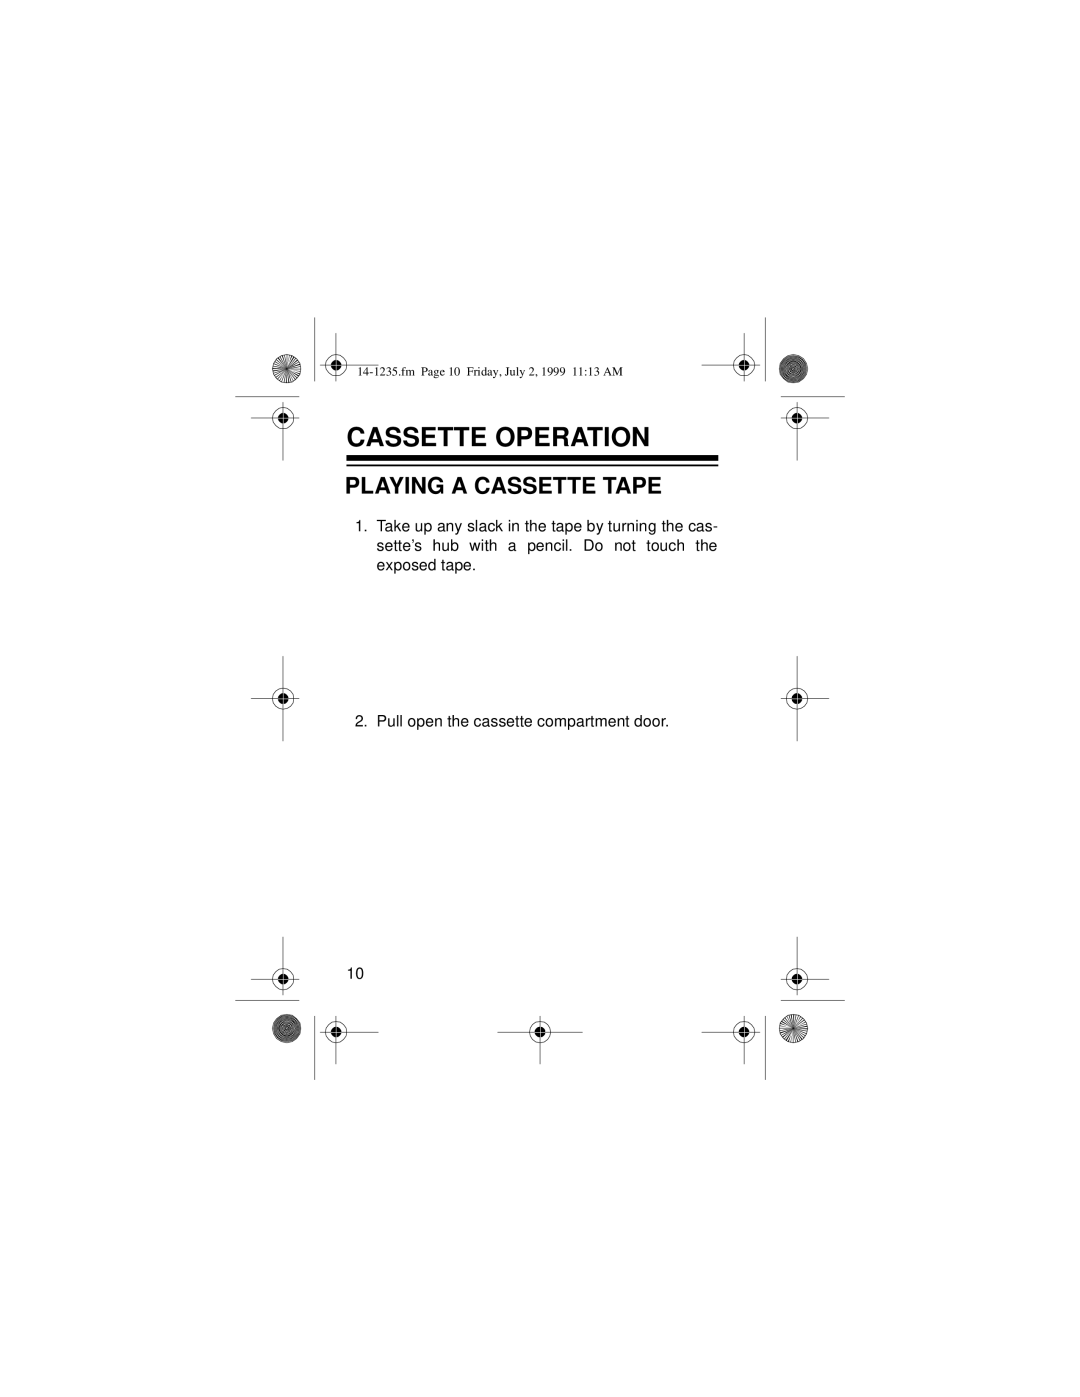 Optimus SCP-92 owner manual Cassette Operation, Playing A Cassette Tape, fmPage 10 Friday, July 2, 1999 11 13 AM 